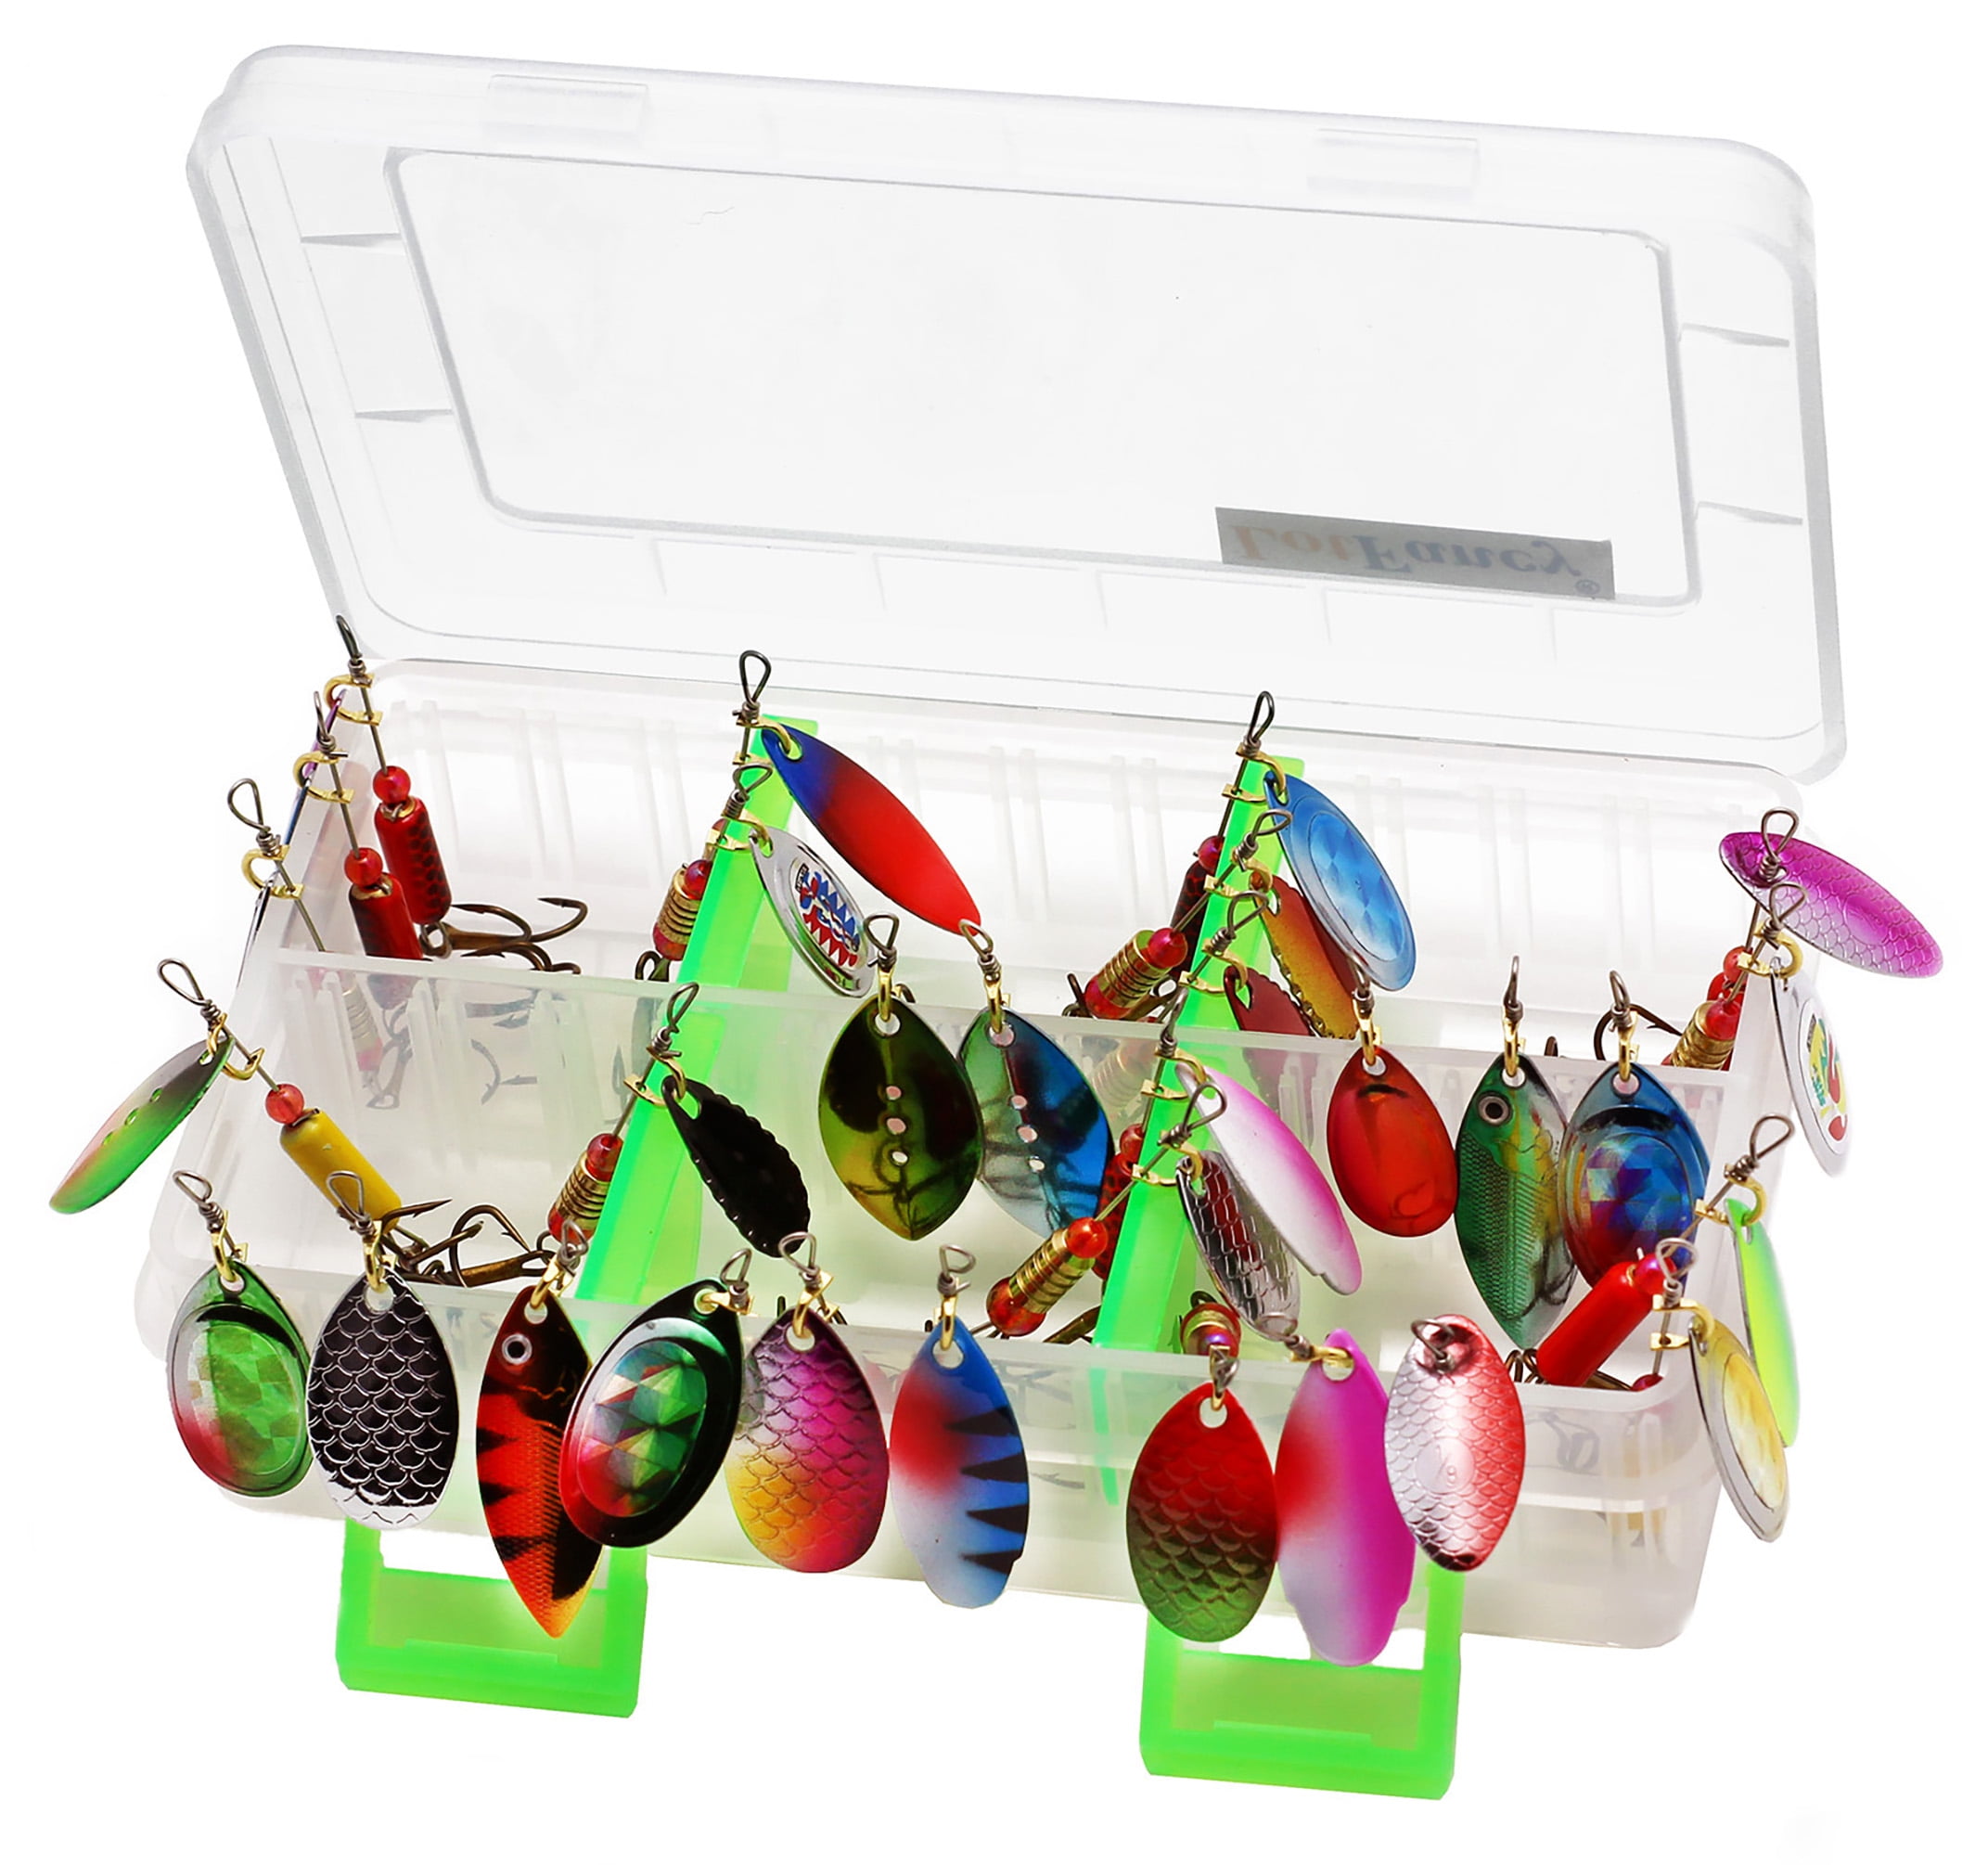  Fishing Lures Lot with Tackle Box,AGadget 204PCS/Lot